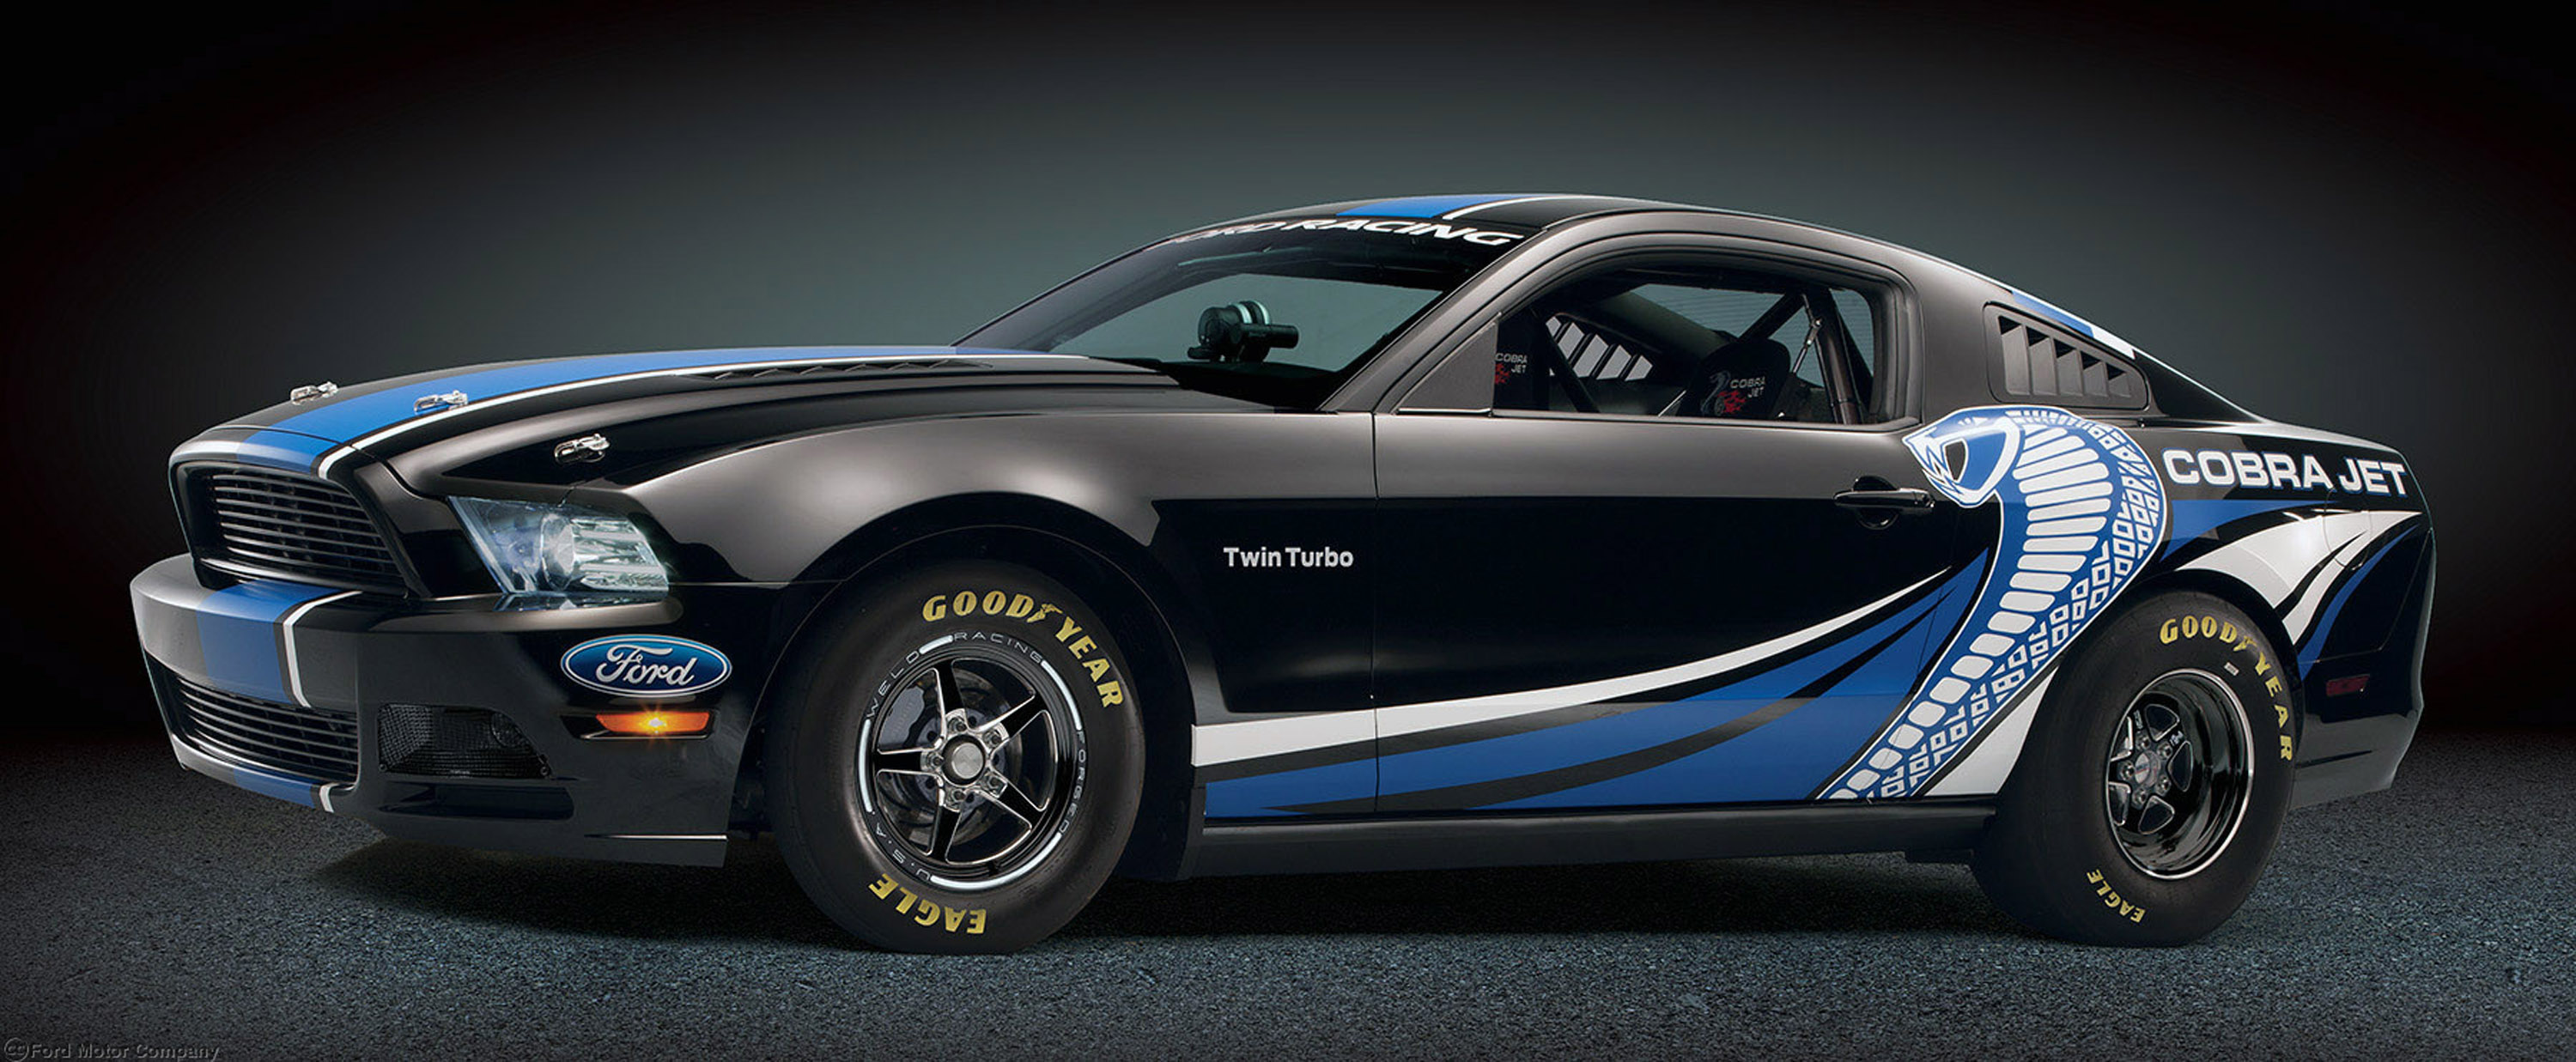 Ford Mustang Cobra Jet Twin Turbo HD Wallpaper Background